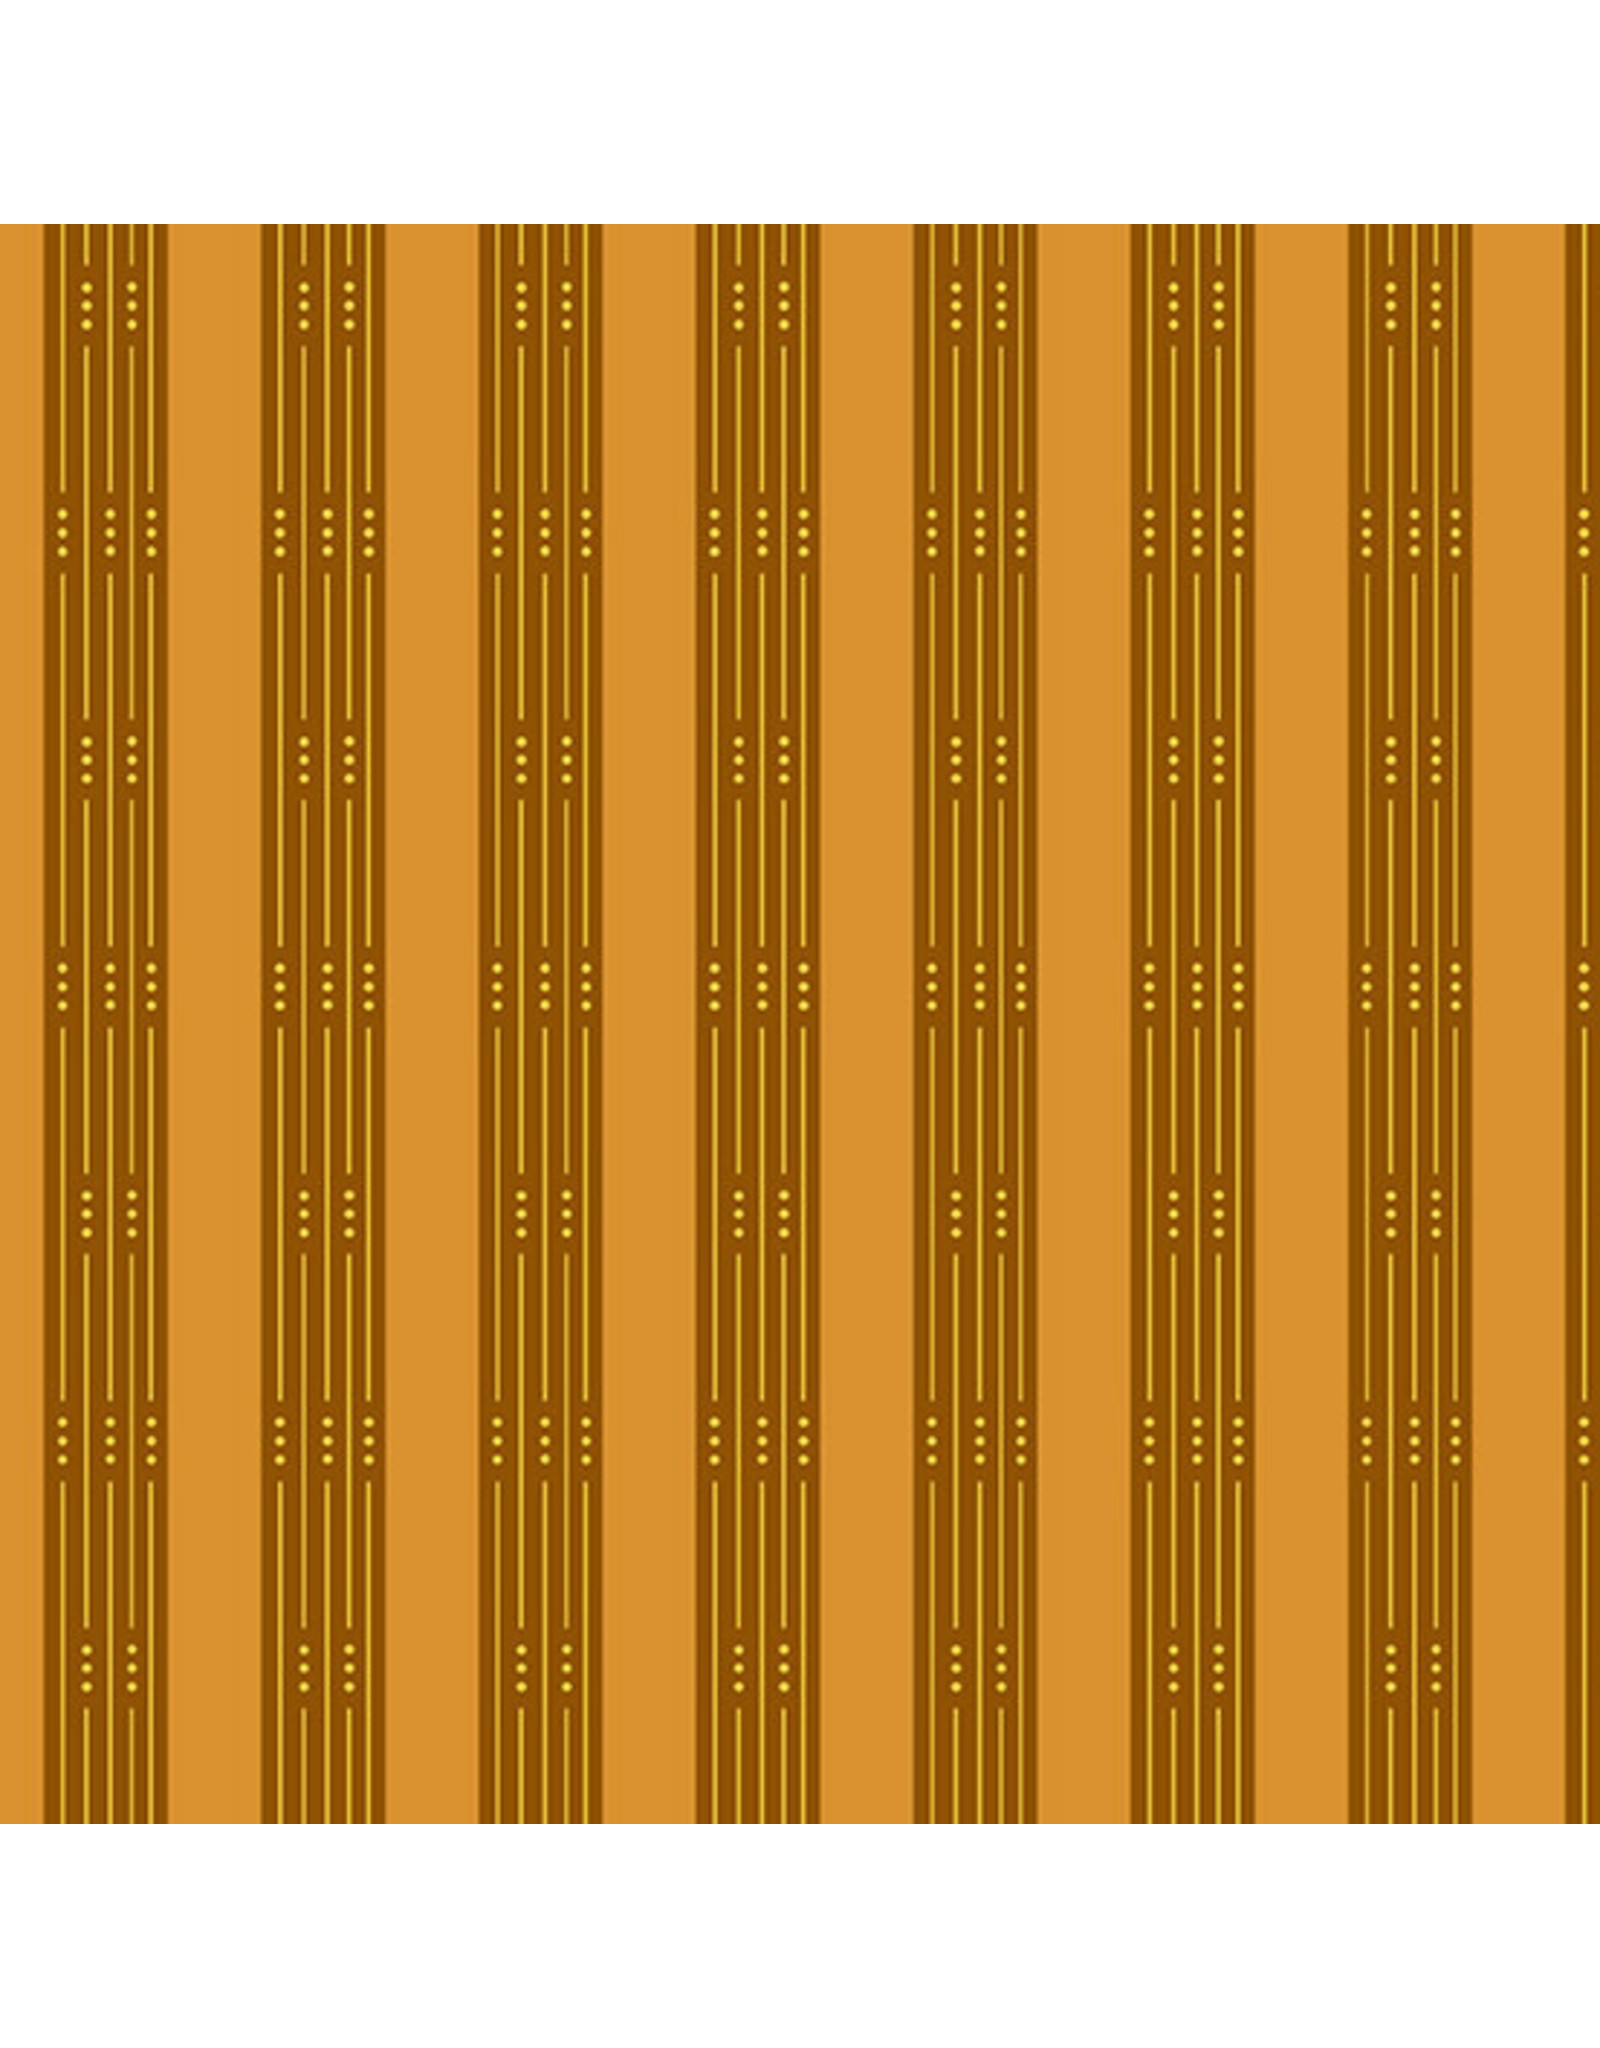 Andover Giucy Giuce - Fabric from the Attic - Throughline Rust - A-9977-O